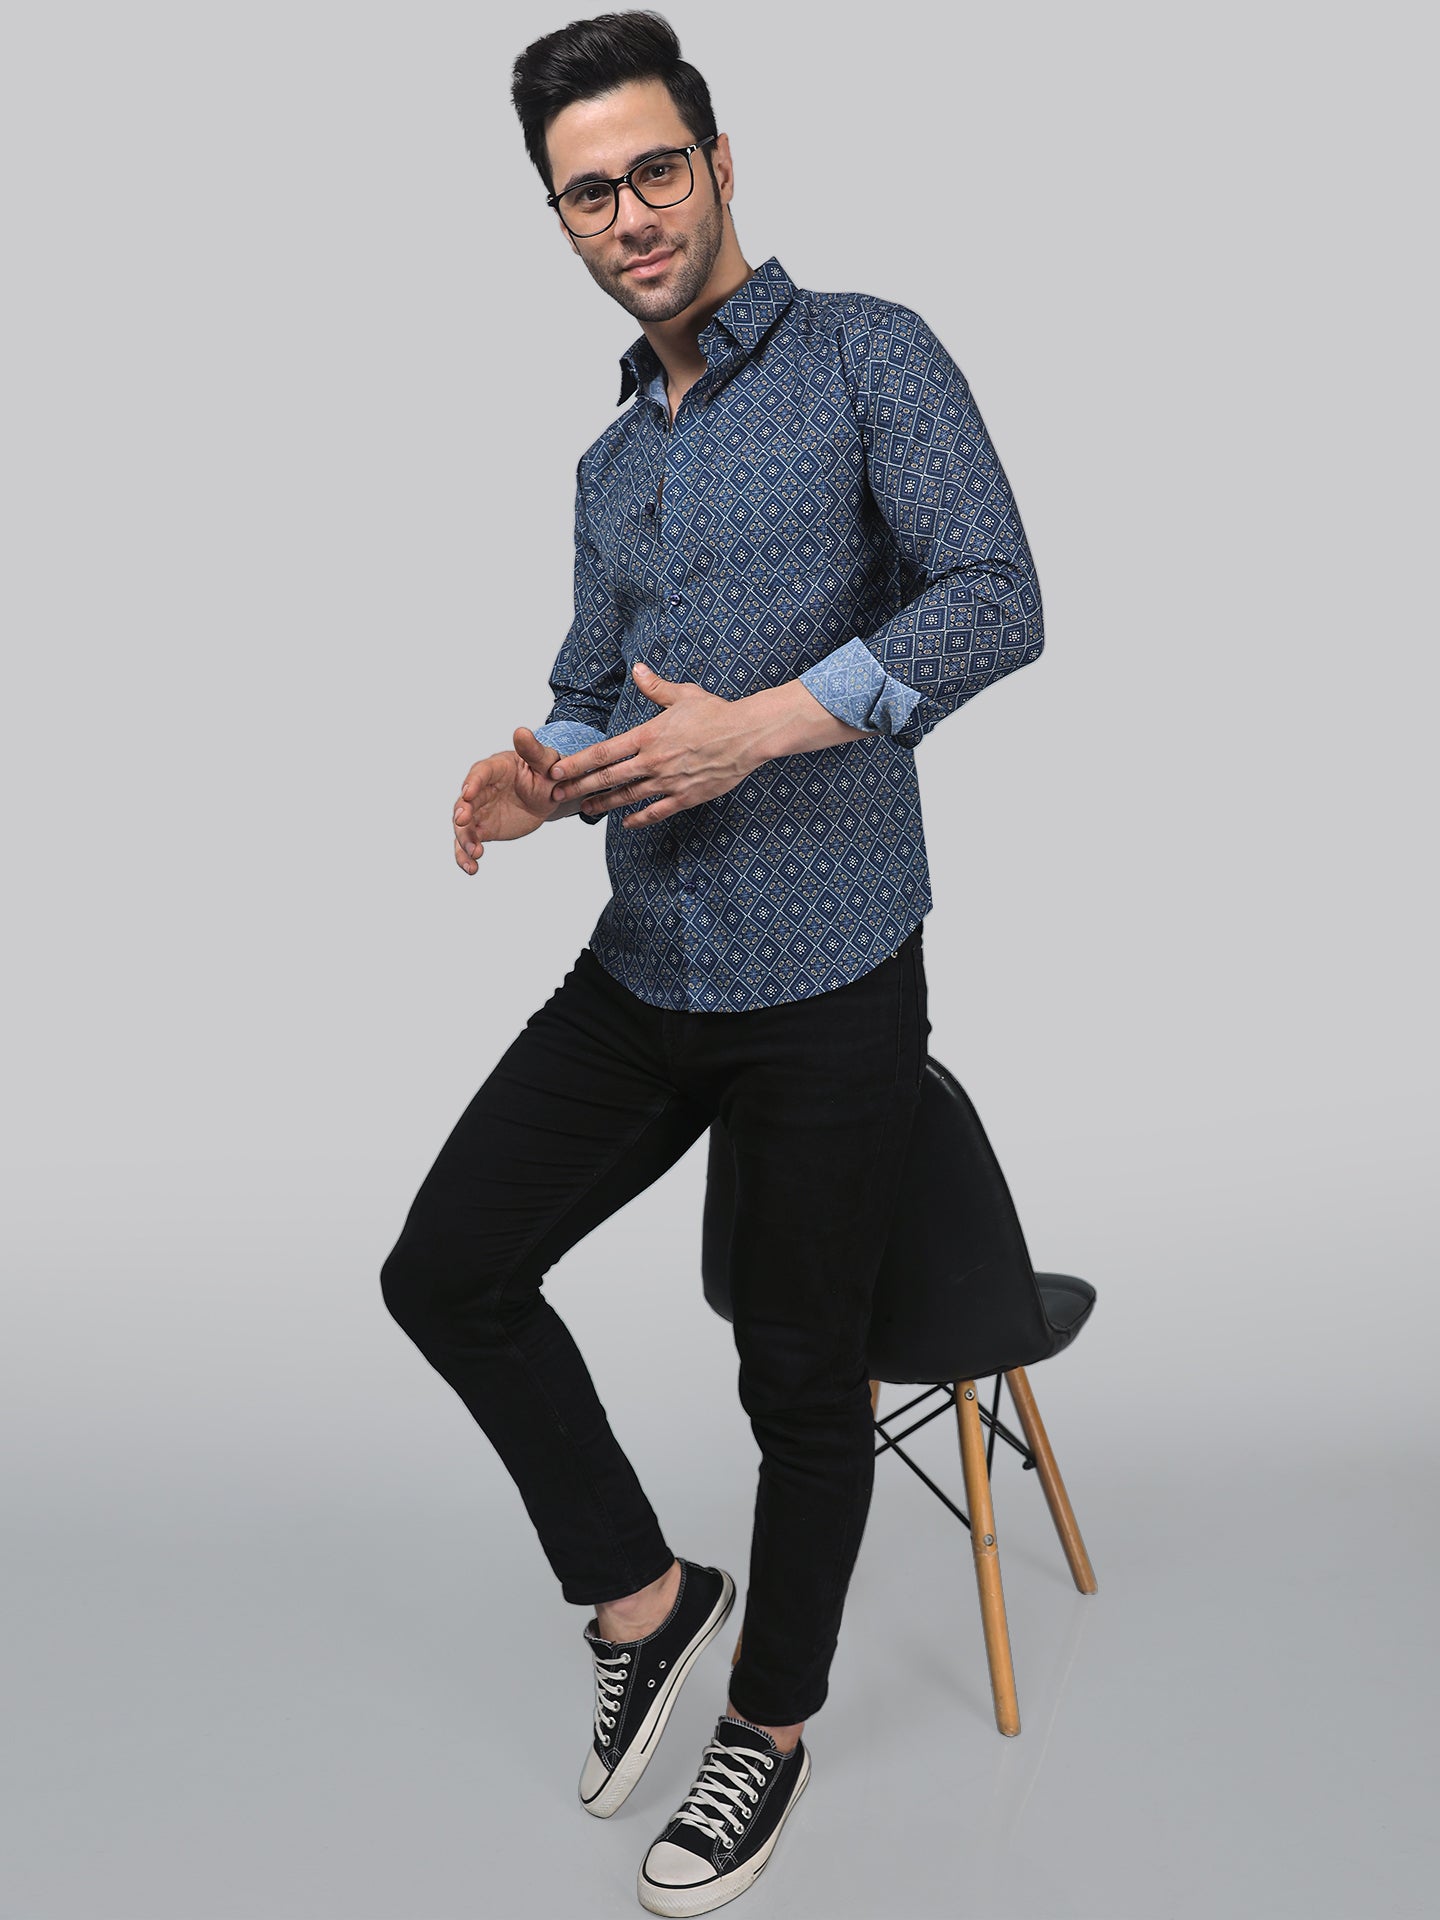 What is the composition of the poplin fabric used in this shirt?